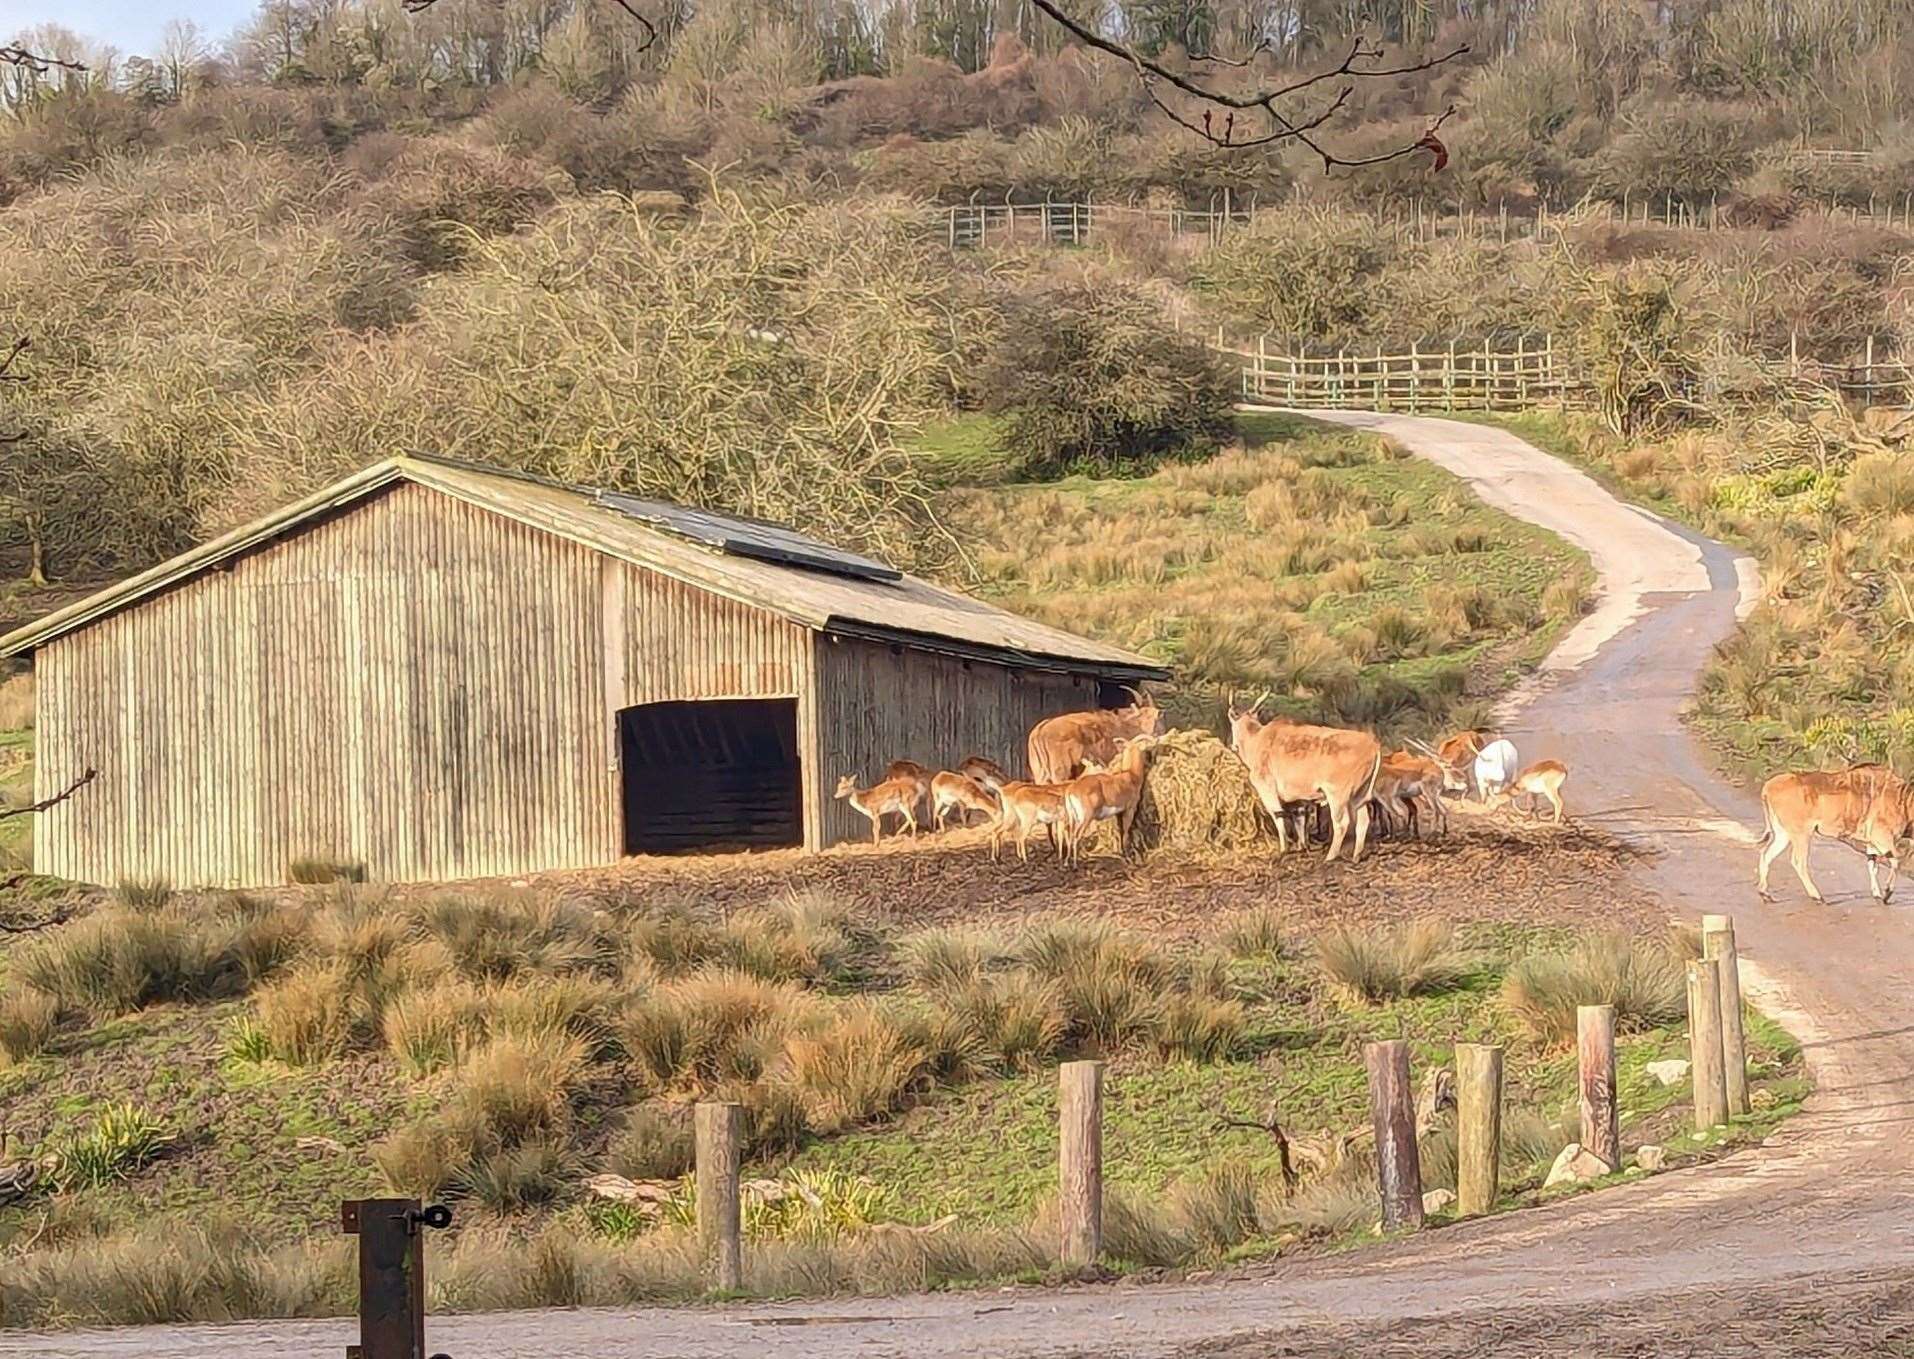 Animals at Port Lympne can be spied from the path